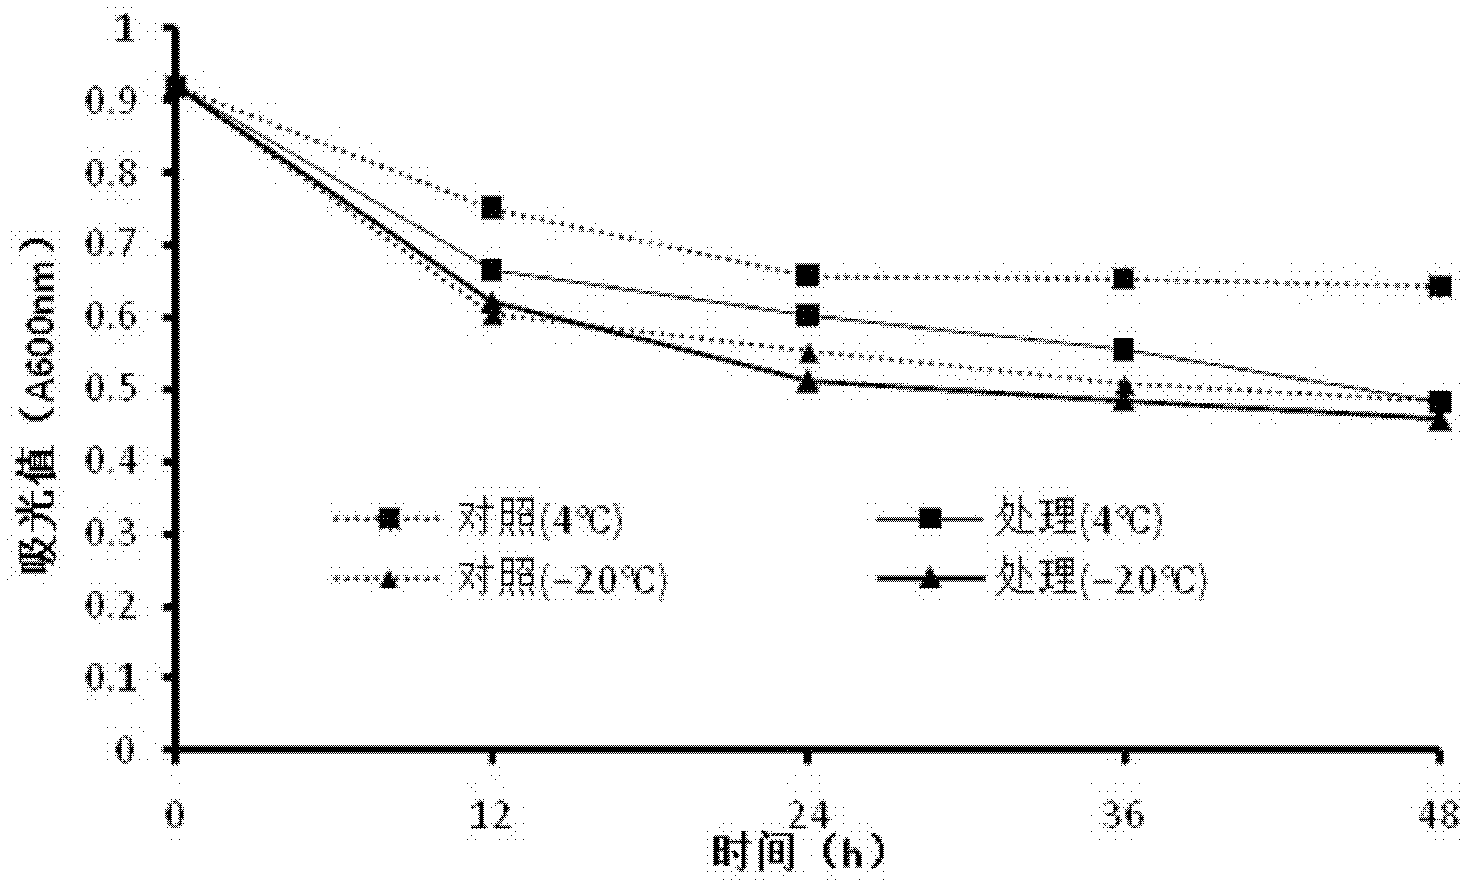 Method for preparing lactoferricin and method for applying lactoferricin in bacterial inhibition of foods